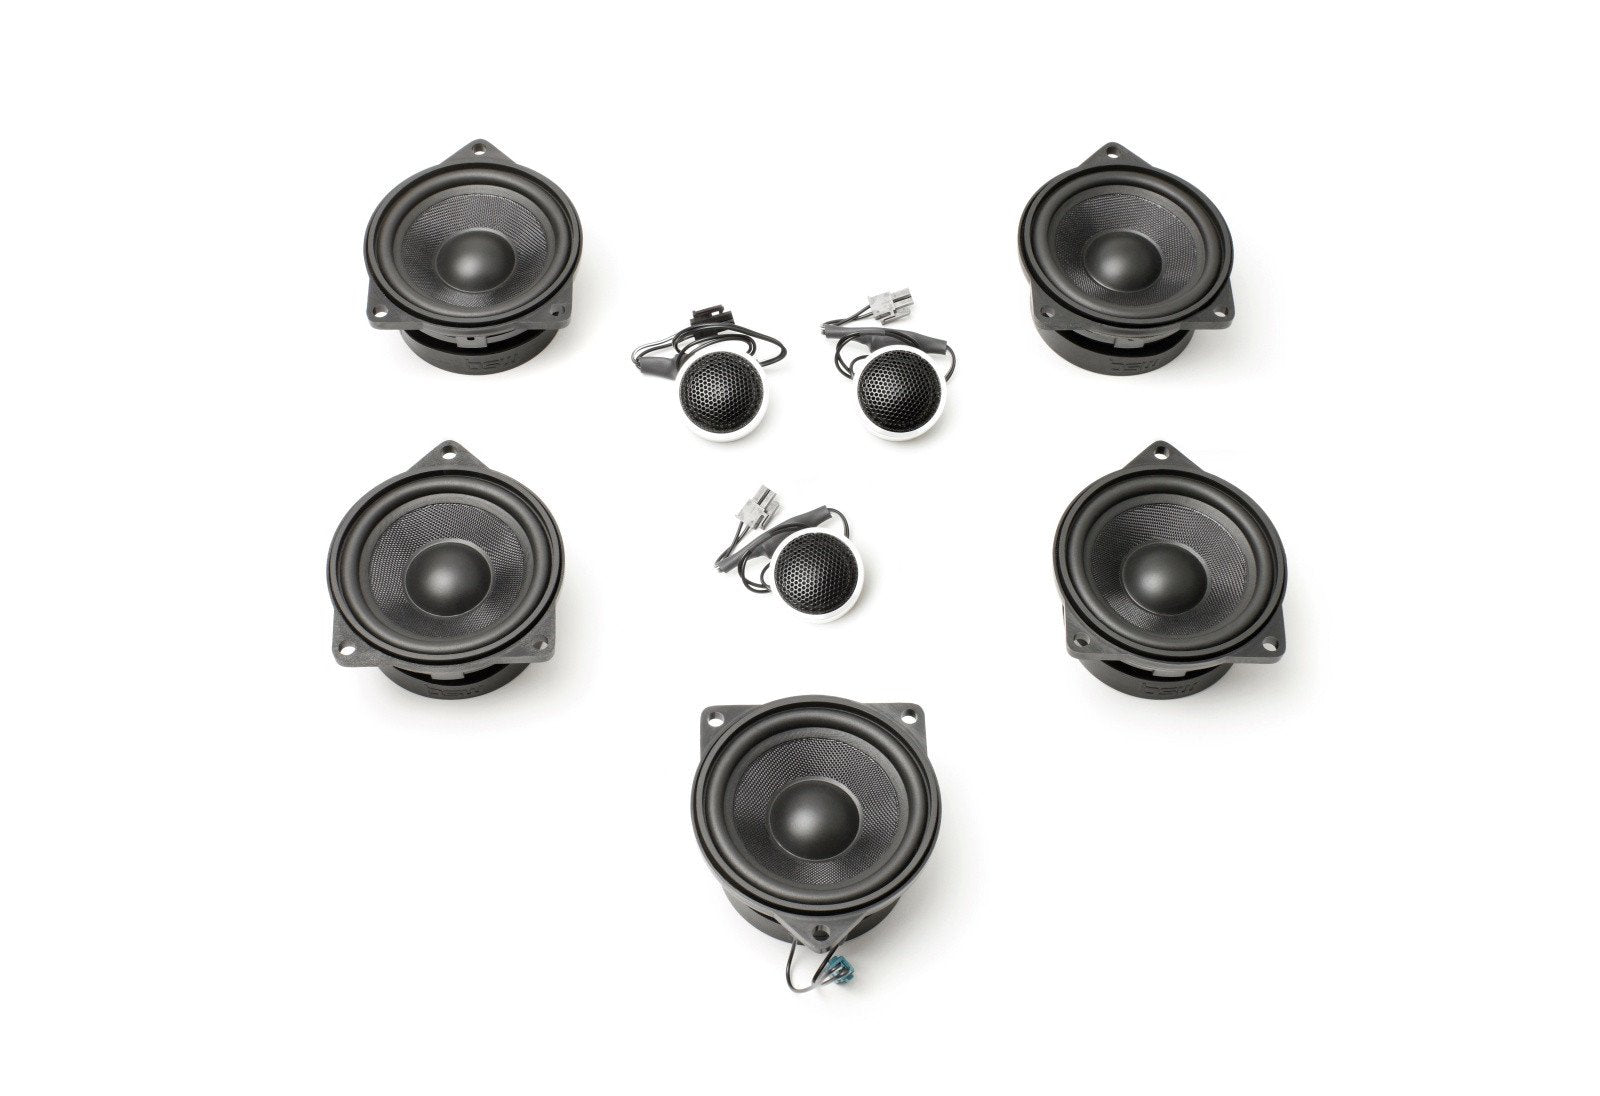 Stage One BMW Speaker Upgrade for G42 Coupe with Standard Hi-Fi